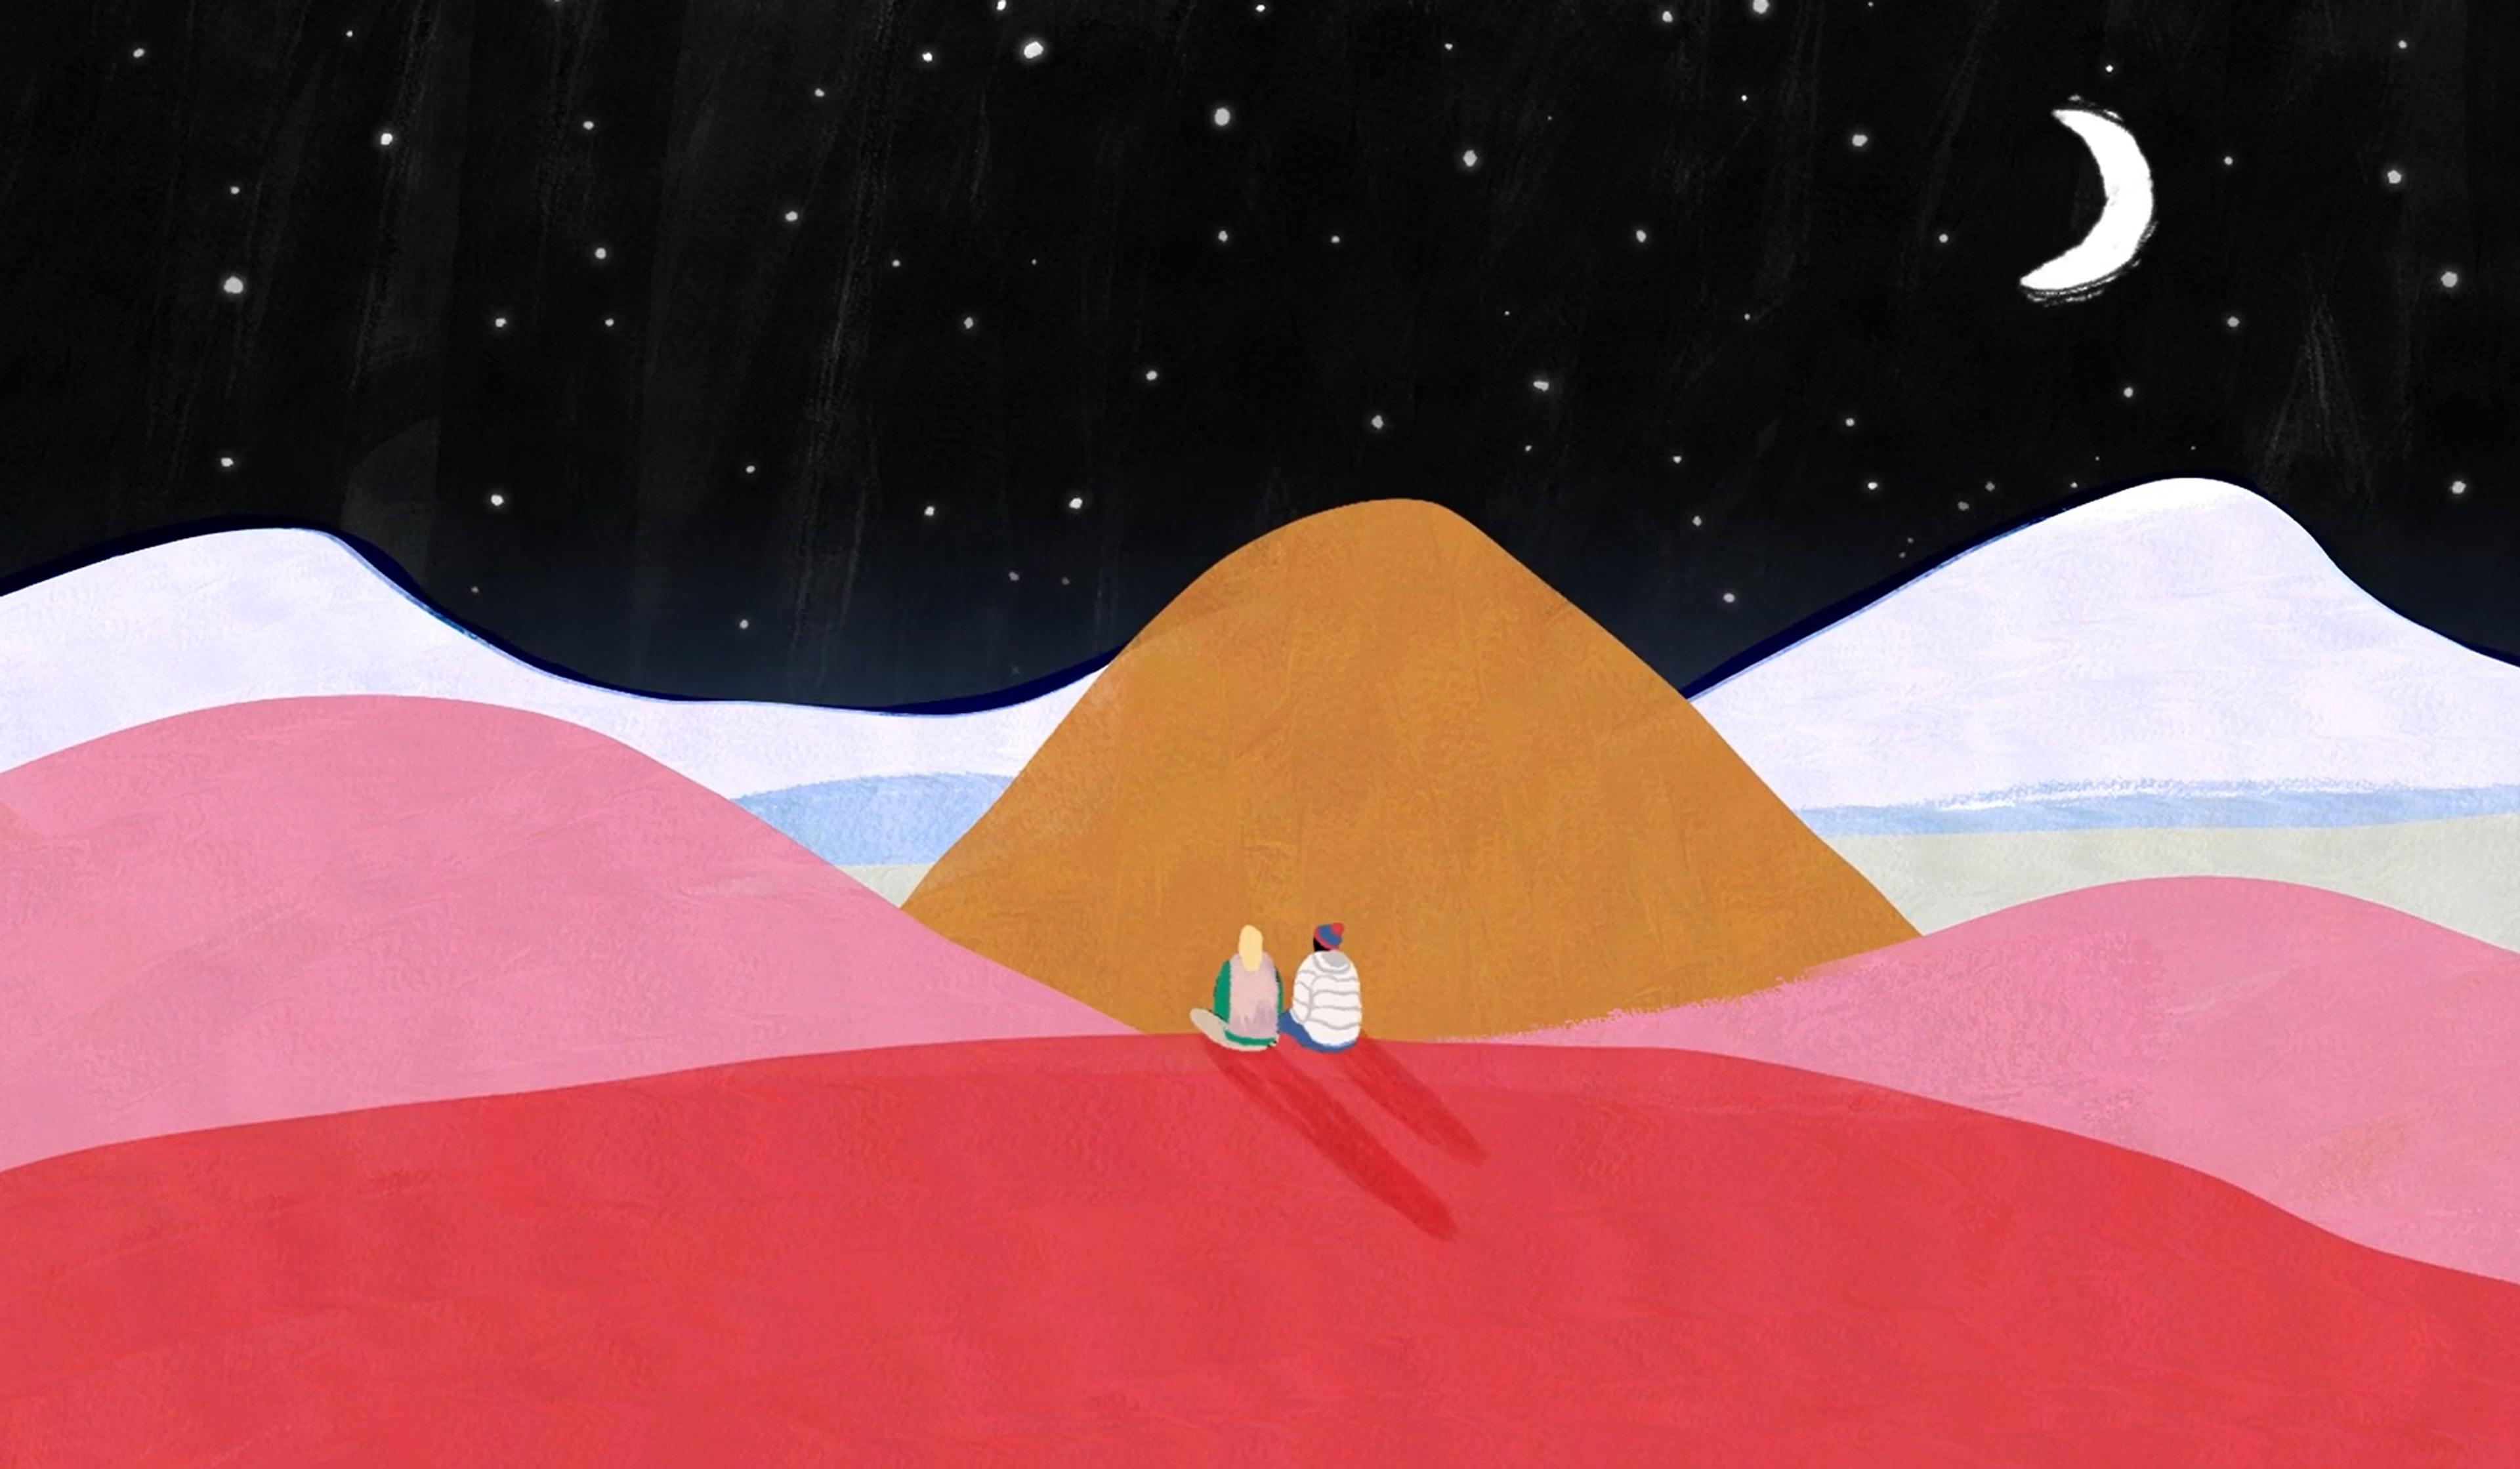 Illustration of two people sitting on colourful hills, gazing at a starry night sky with a crescent moon.